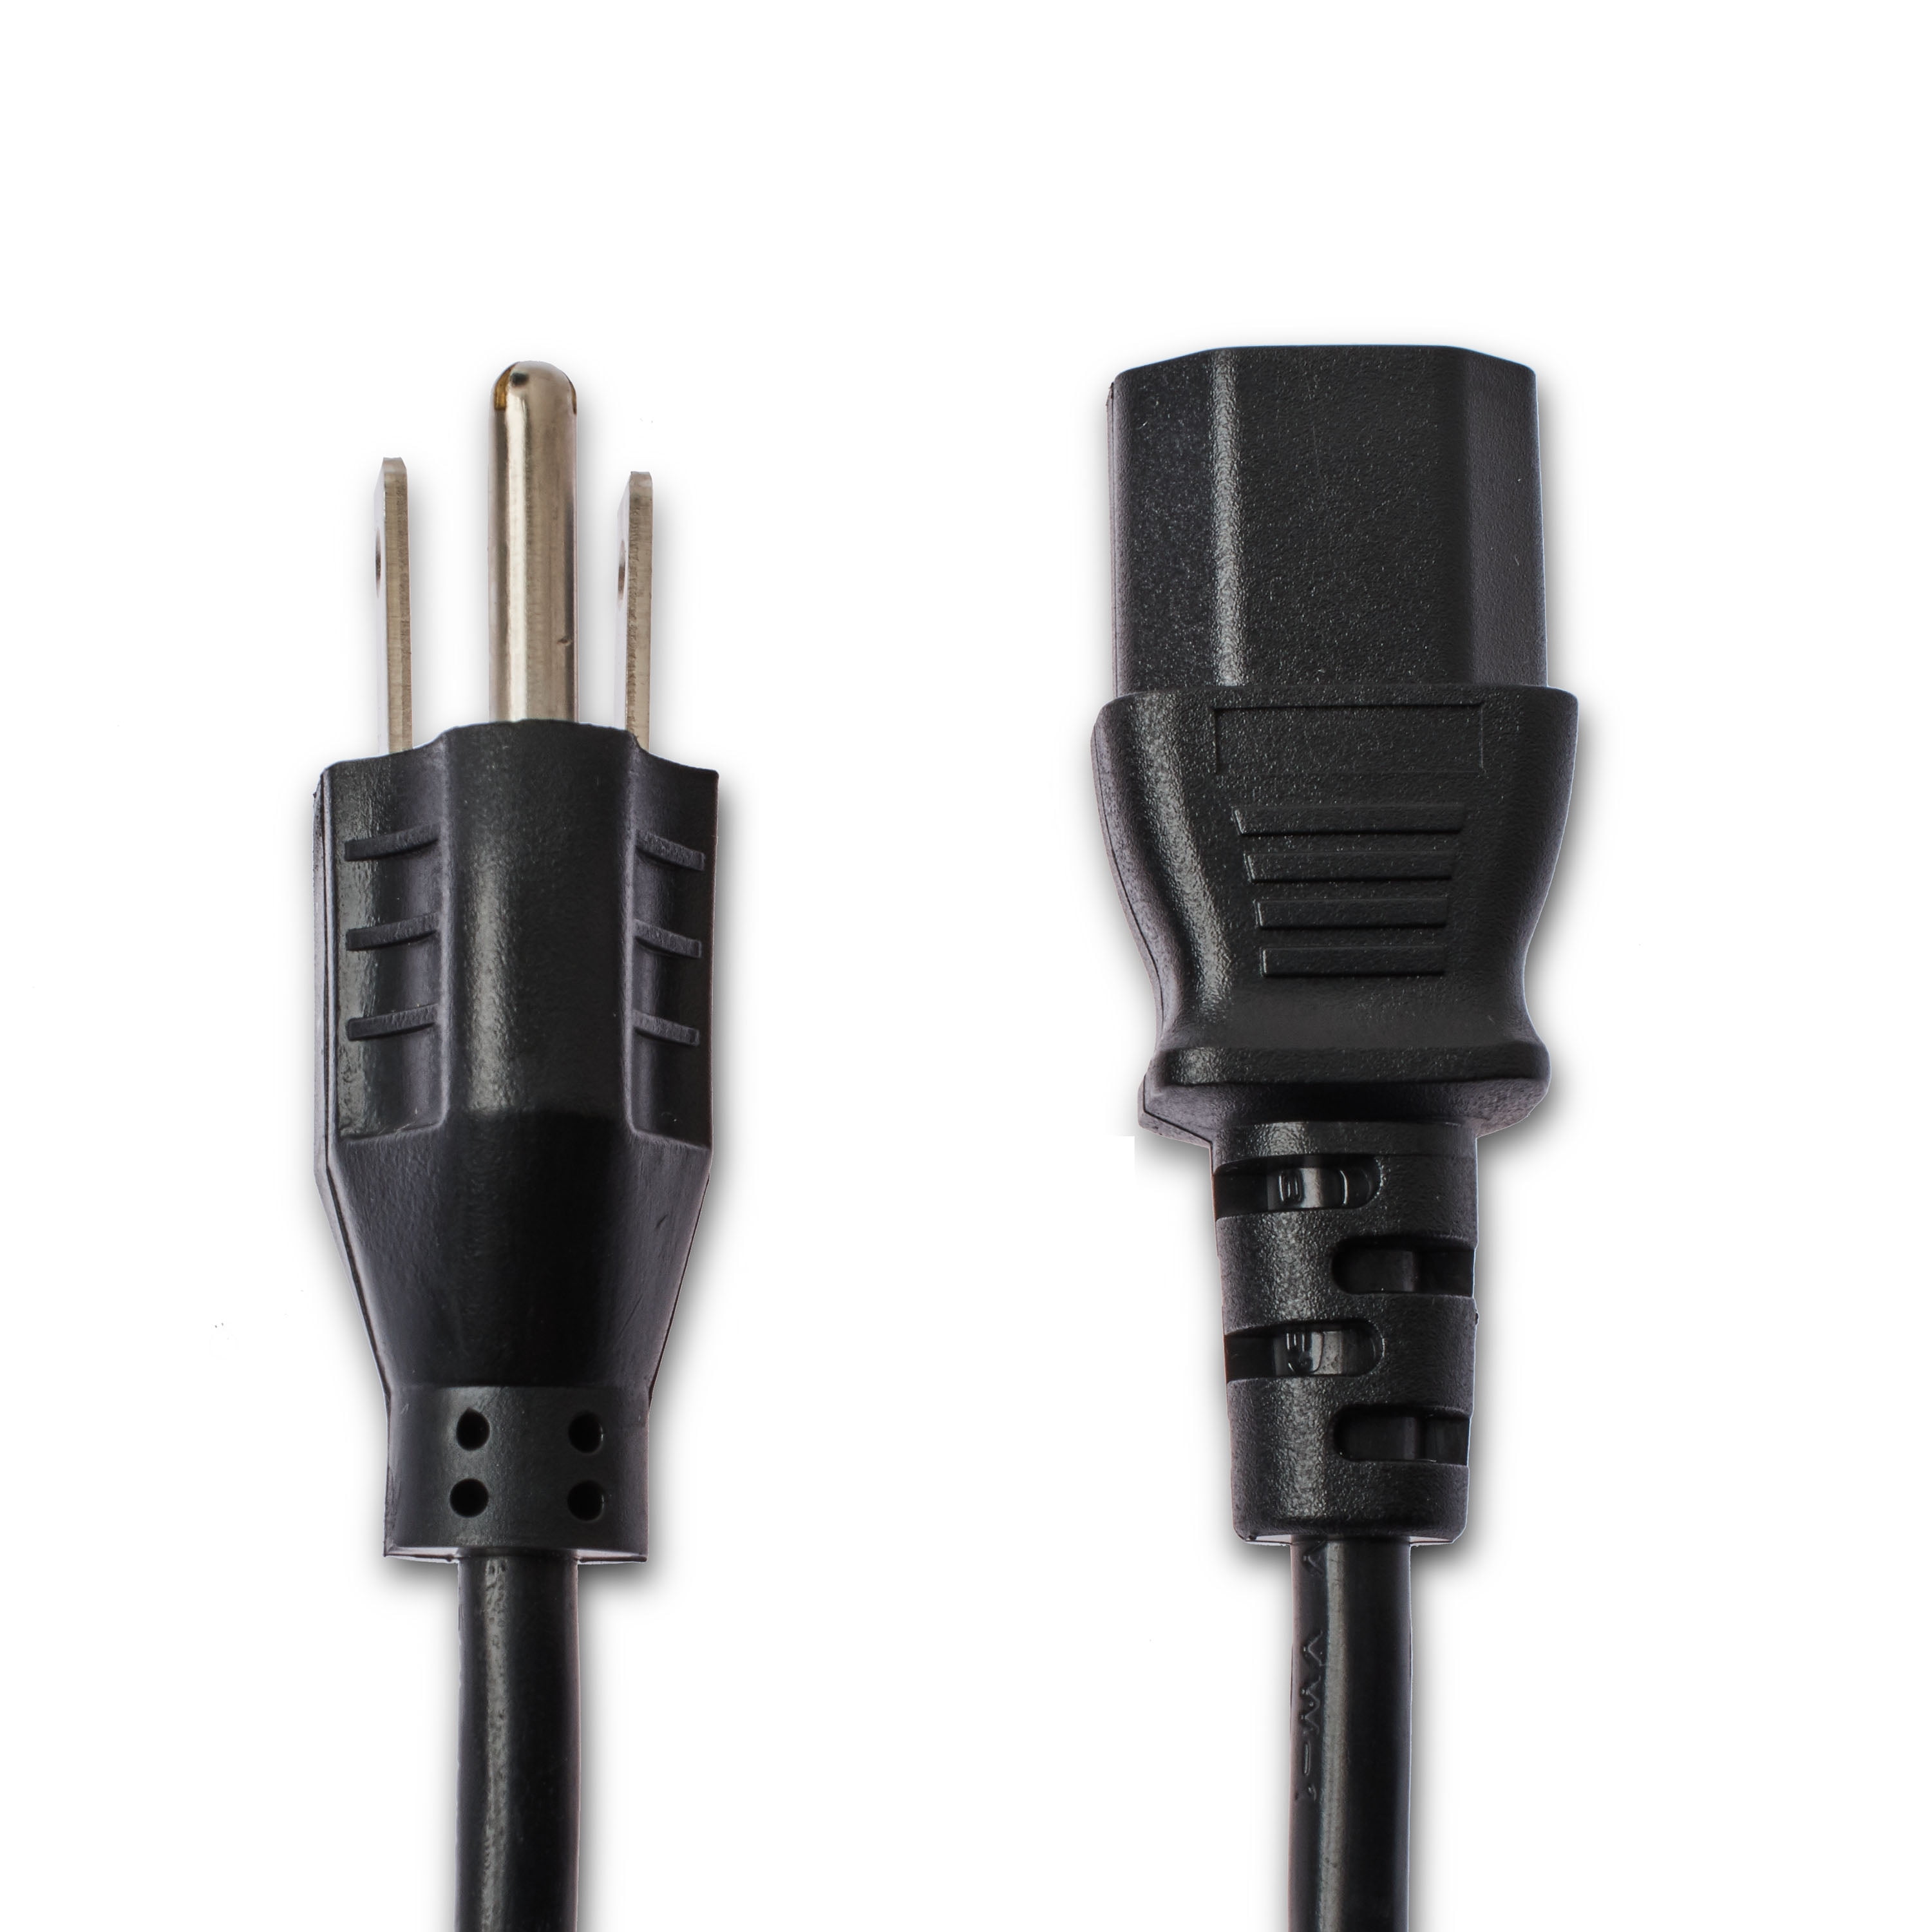 For any 3 Pin AC Power Connection ***Universal Power Cord for Arcade Games*** 